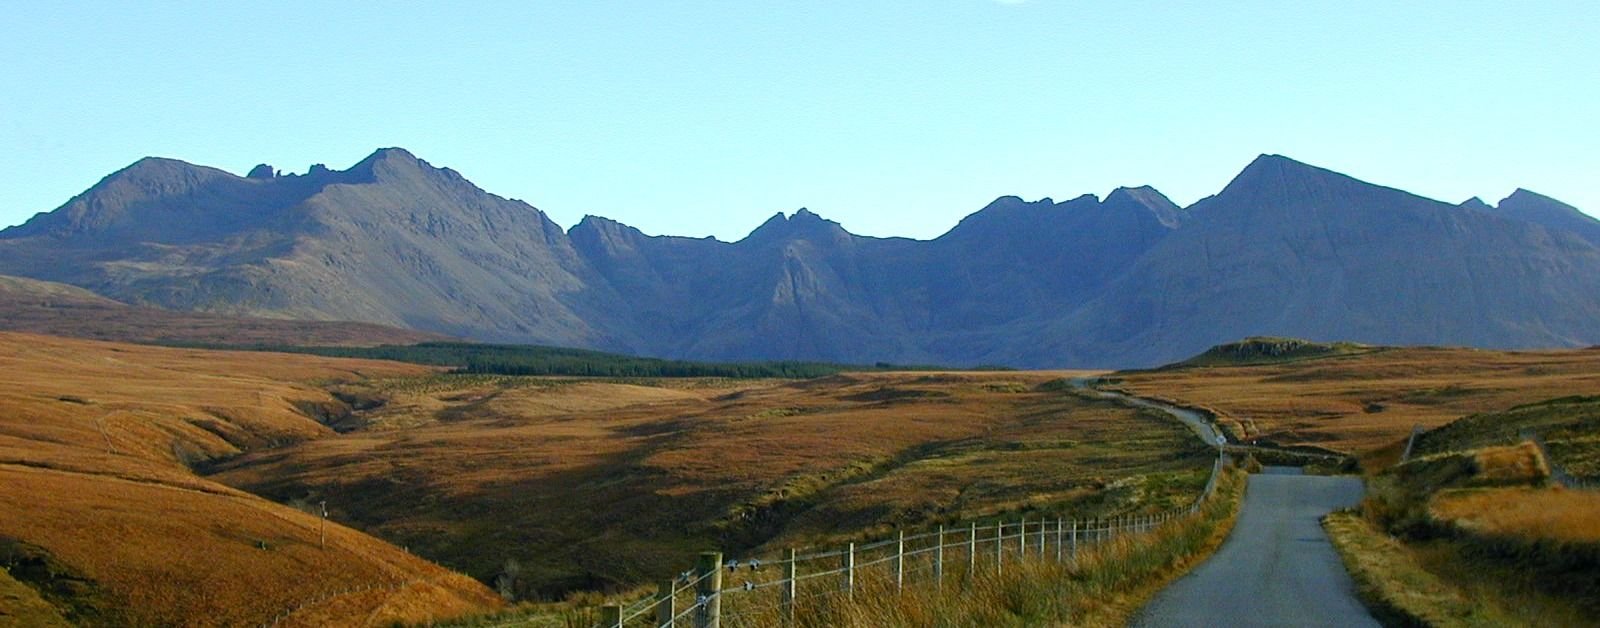 Cuillin Hills from the Glen Brittle road